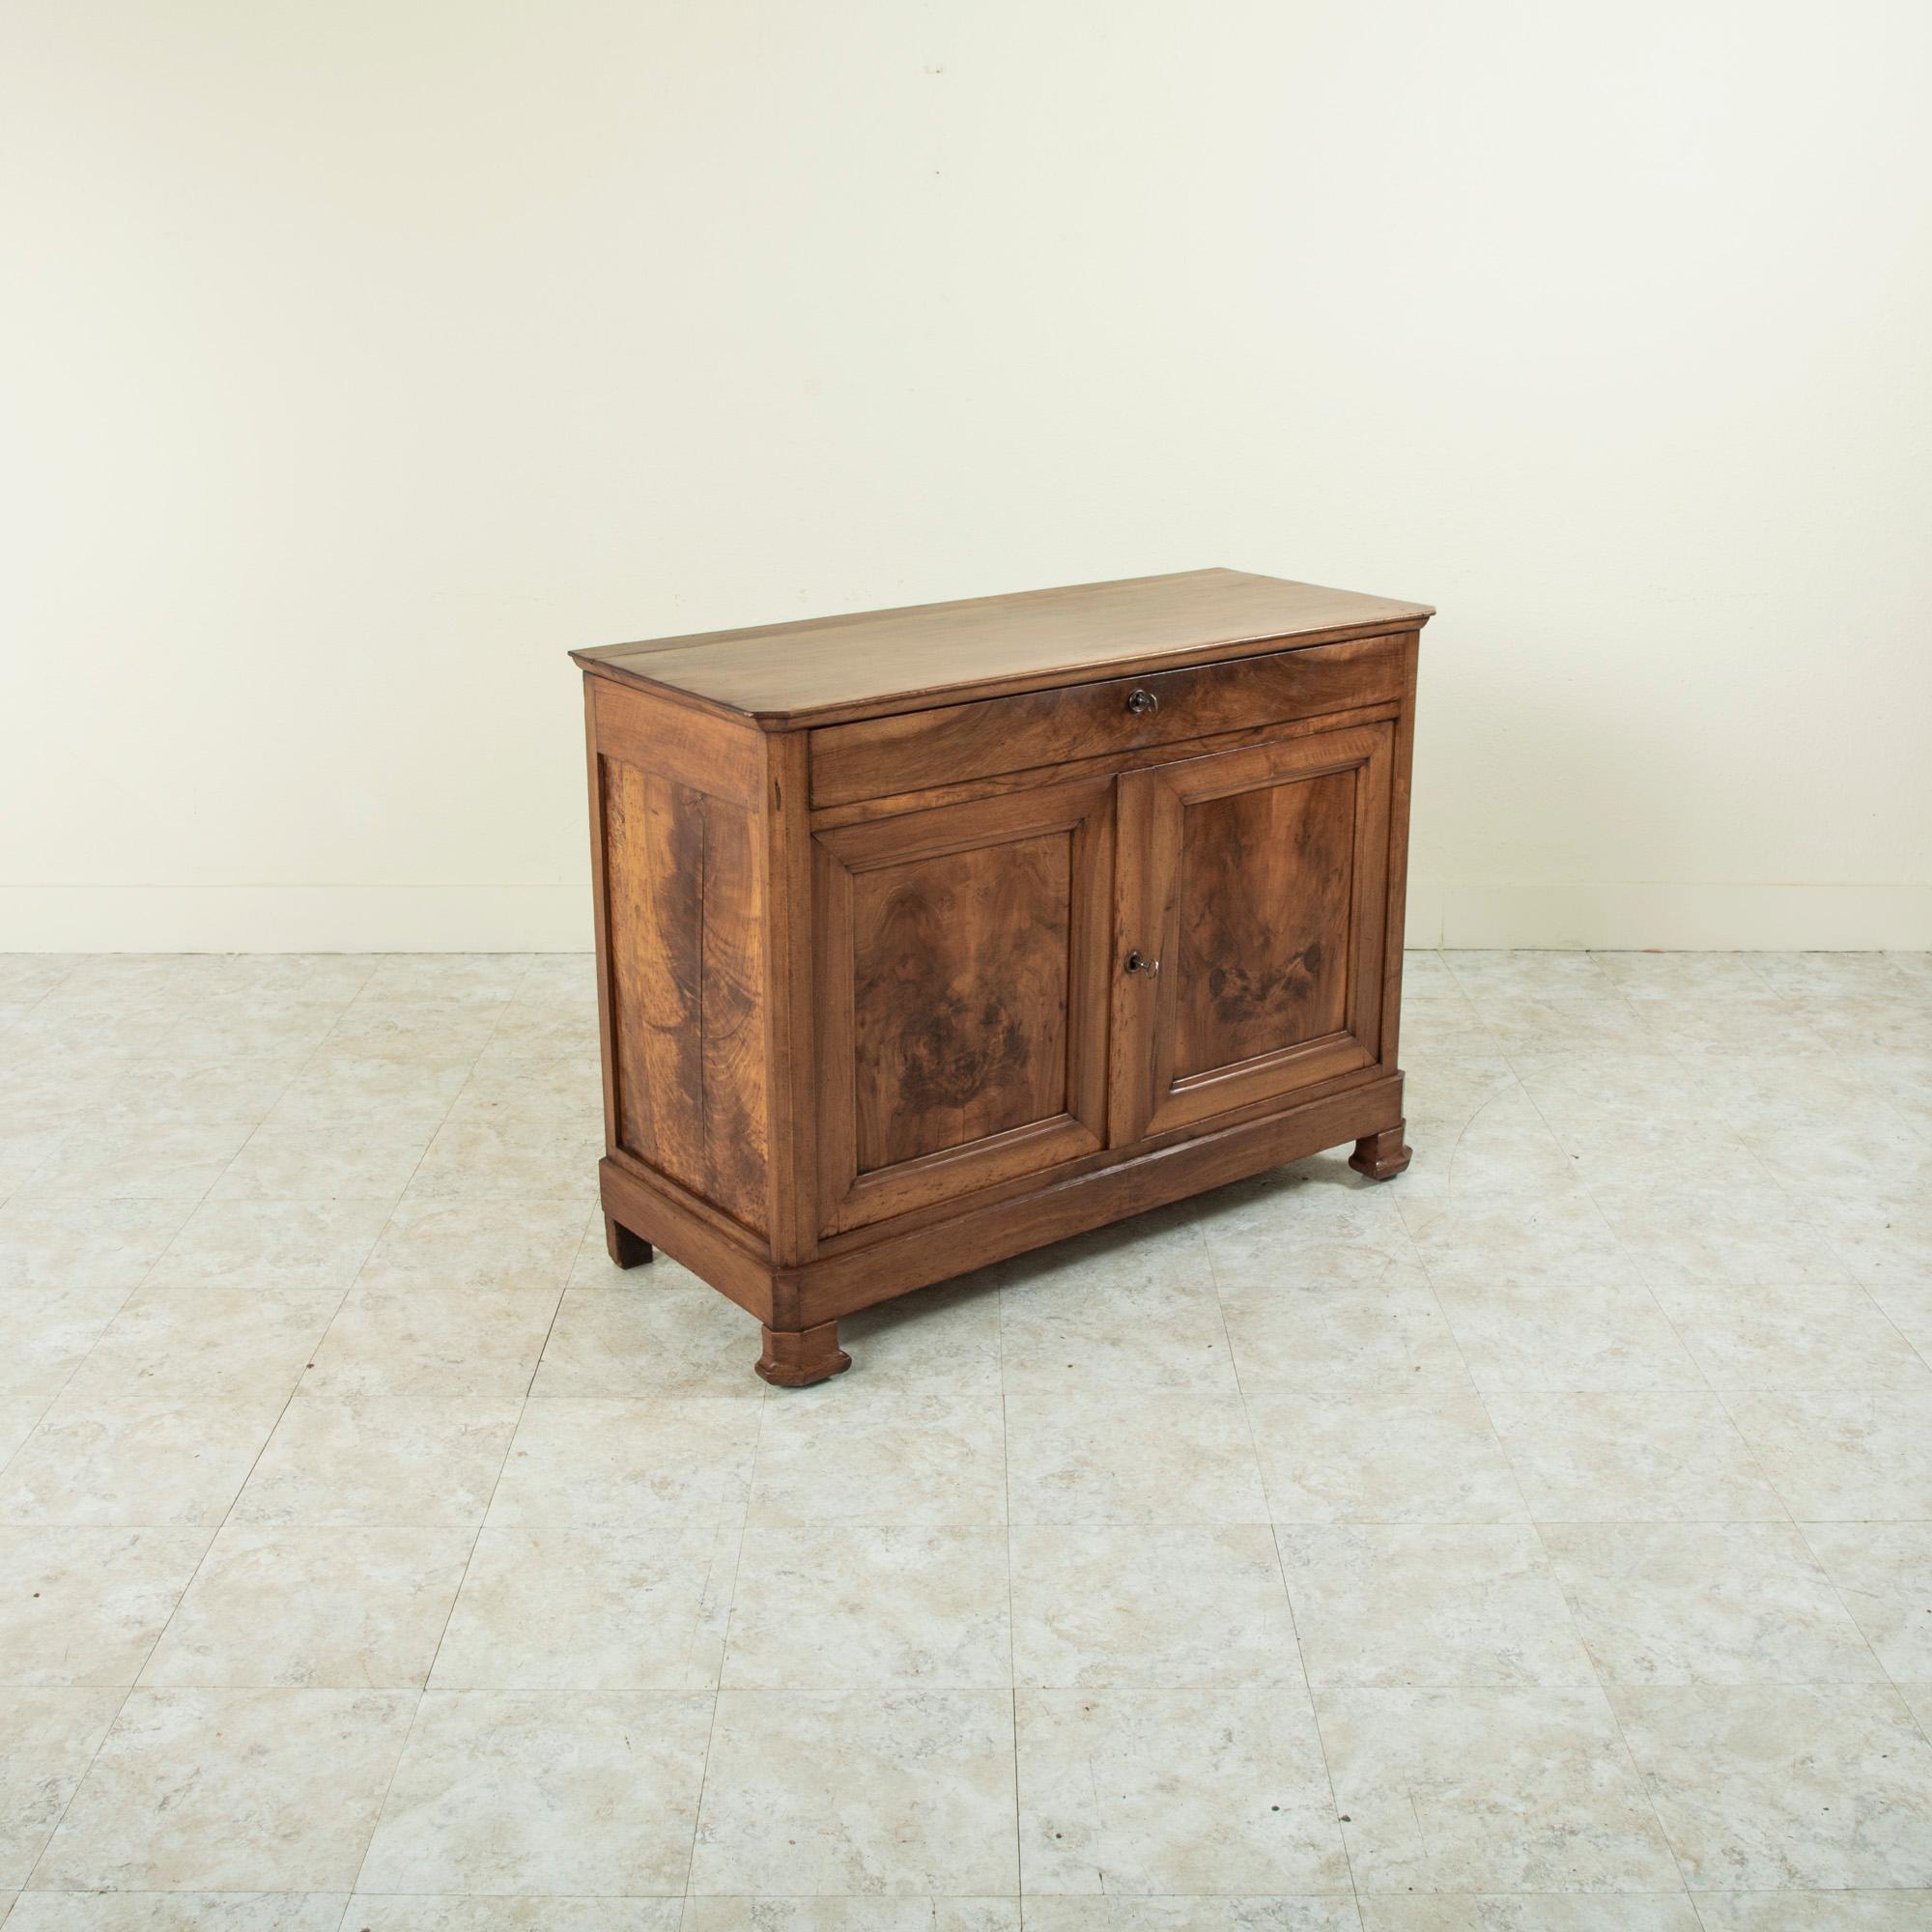 With only a 46.5 inch width, this small scale Louis Philippe period buffet from the nineteenth century is constructed of solid walnut. It features a single drawer of dovetail construction that fits seamlessly into the apron and two book matched